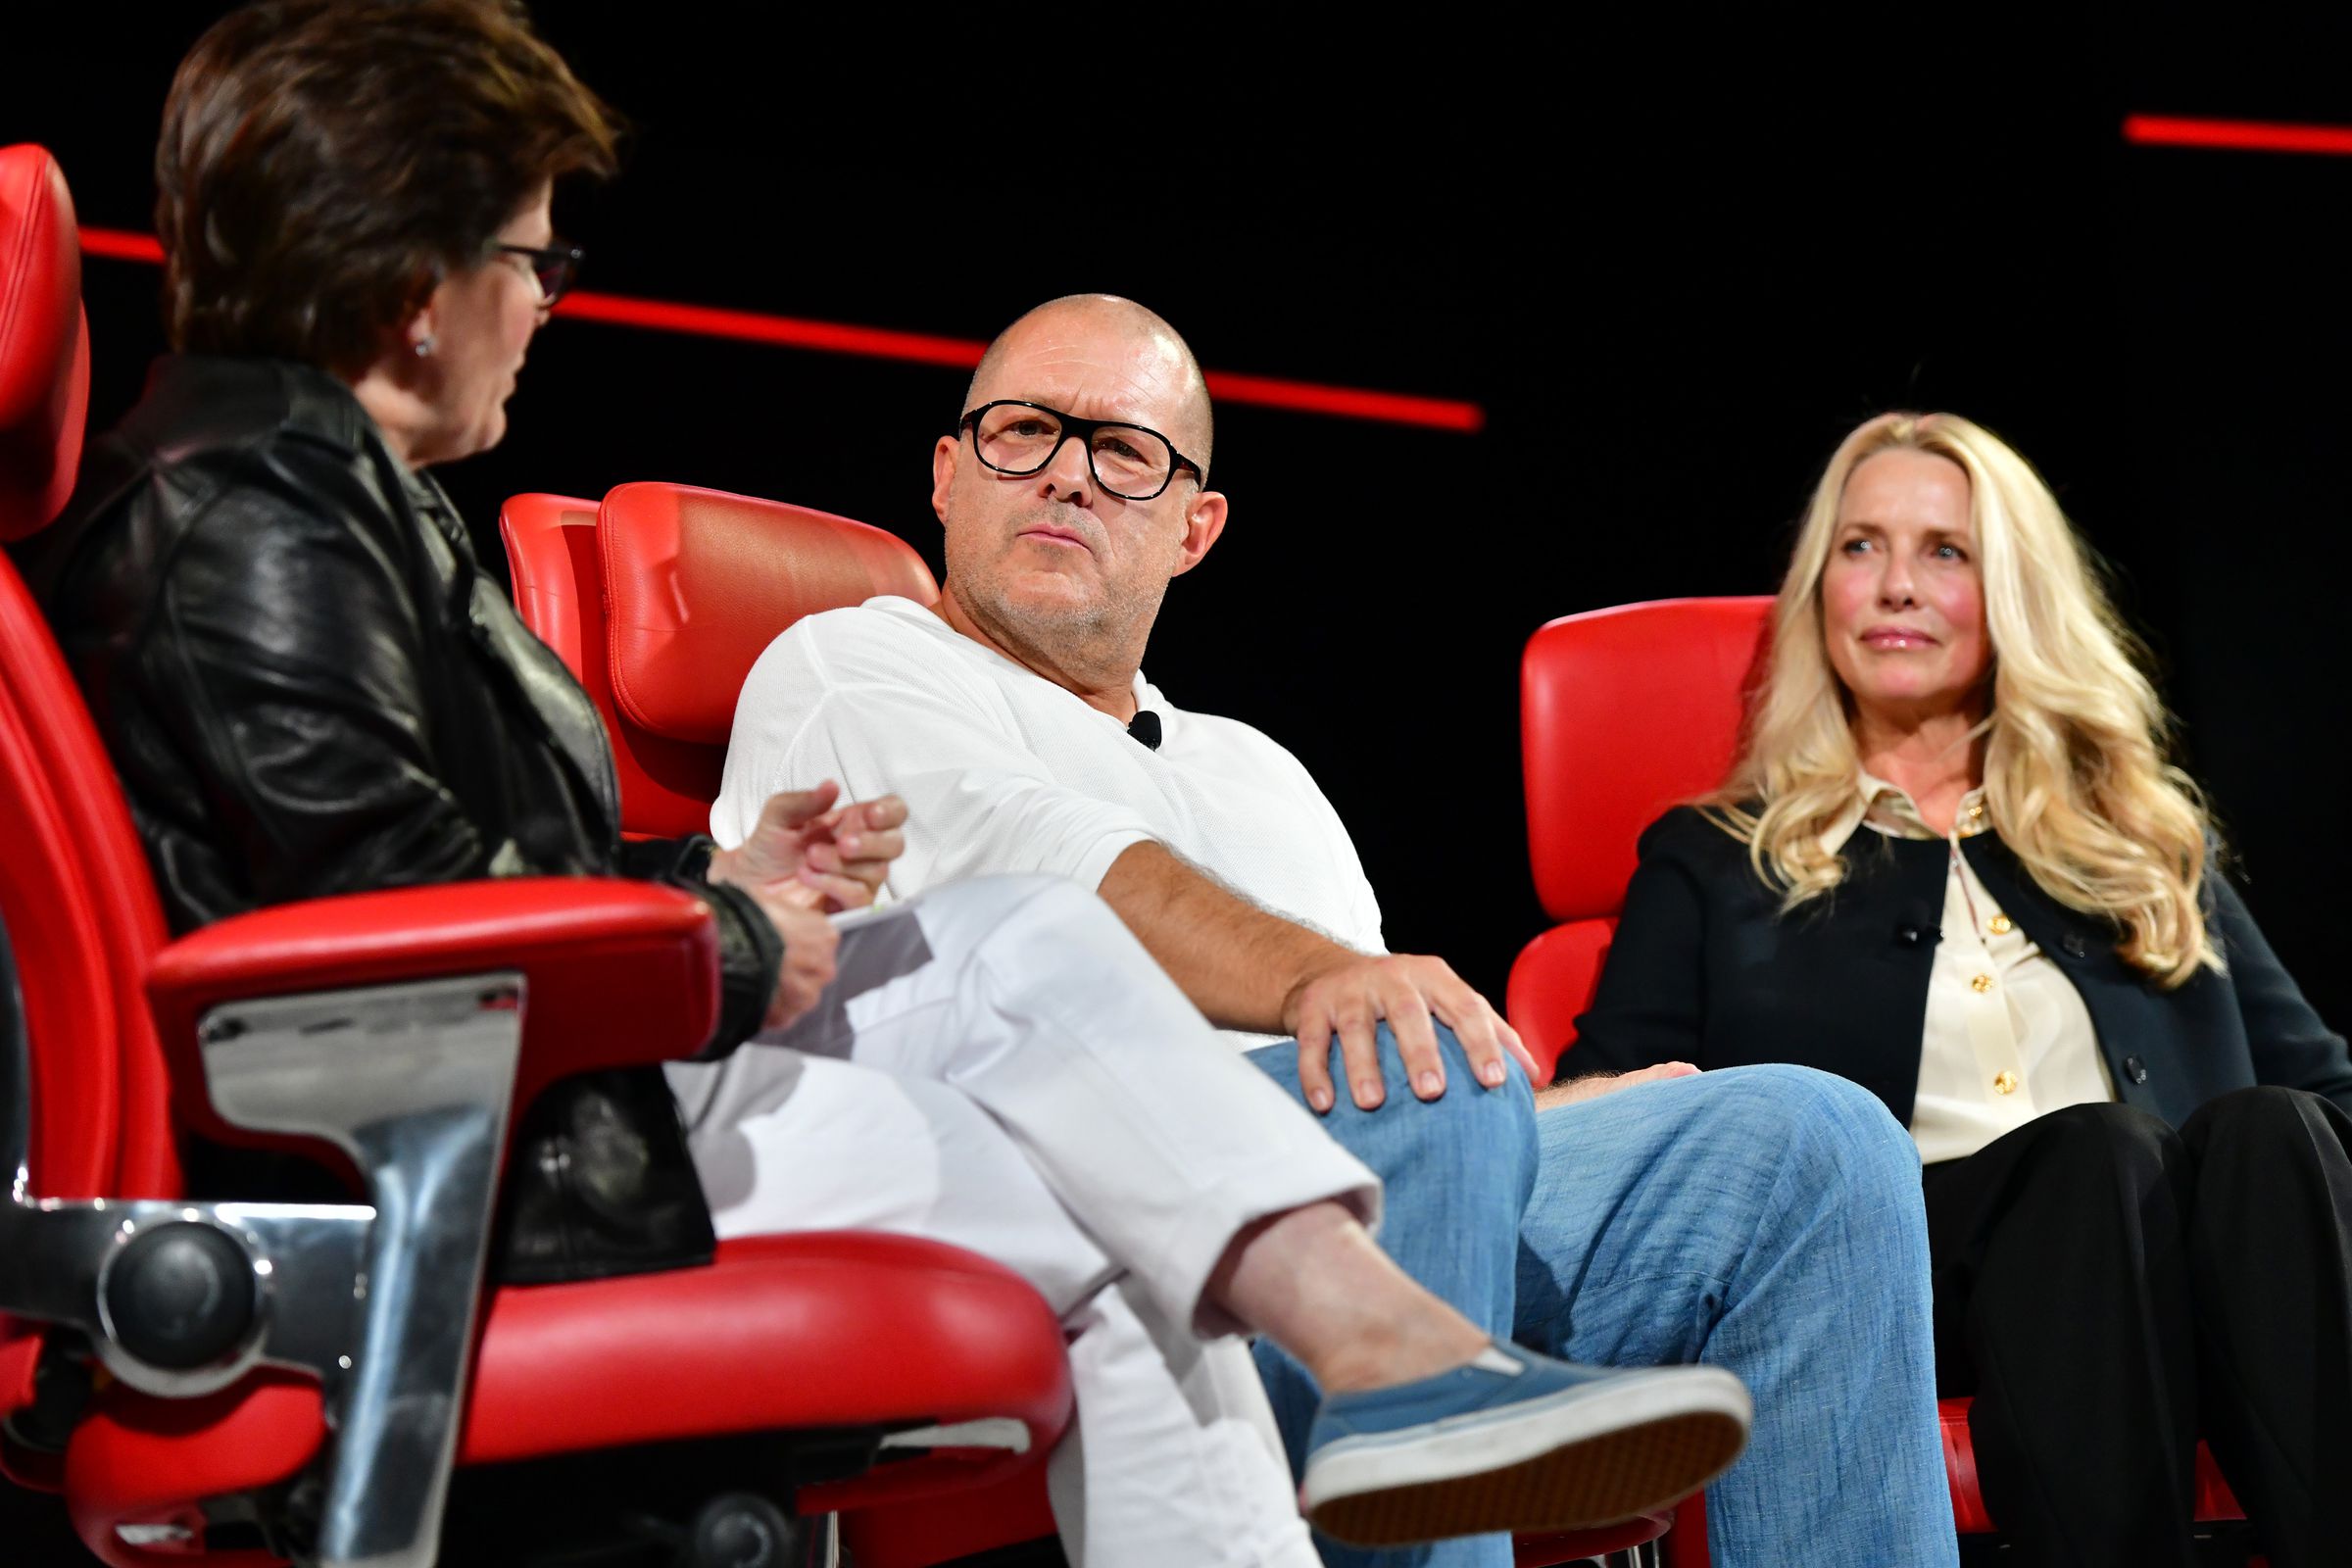 Picture of Jony Ive sitting on stage, looking at Kara Swisher.